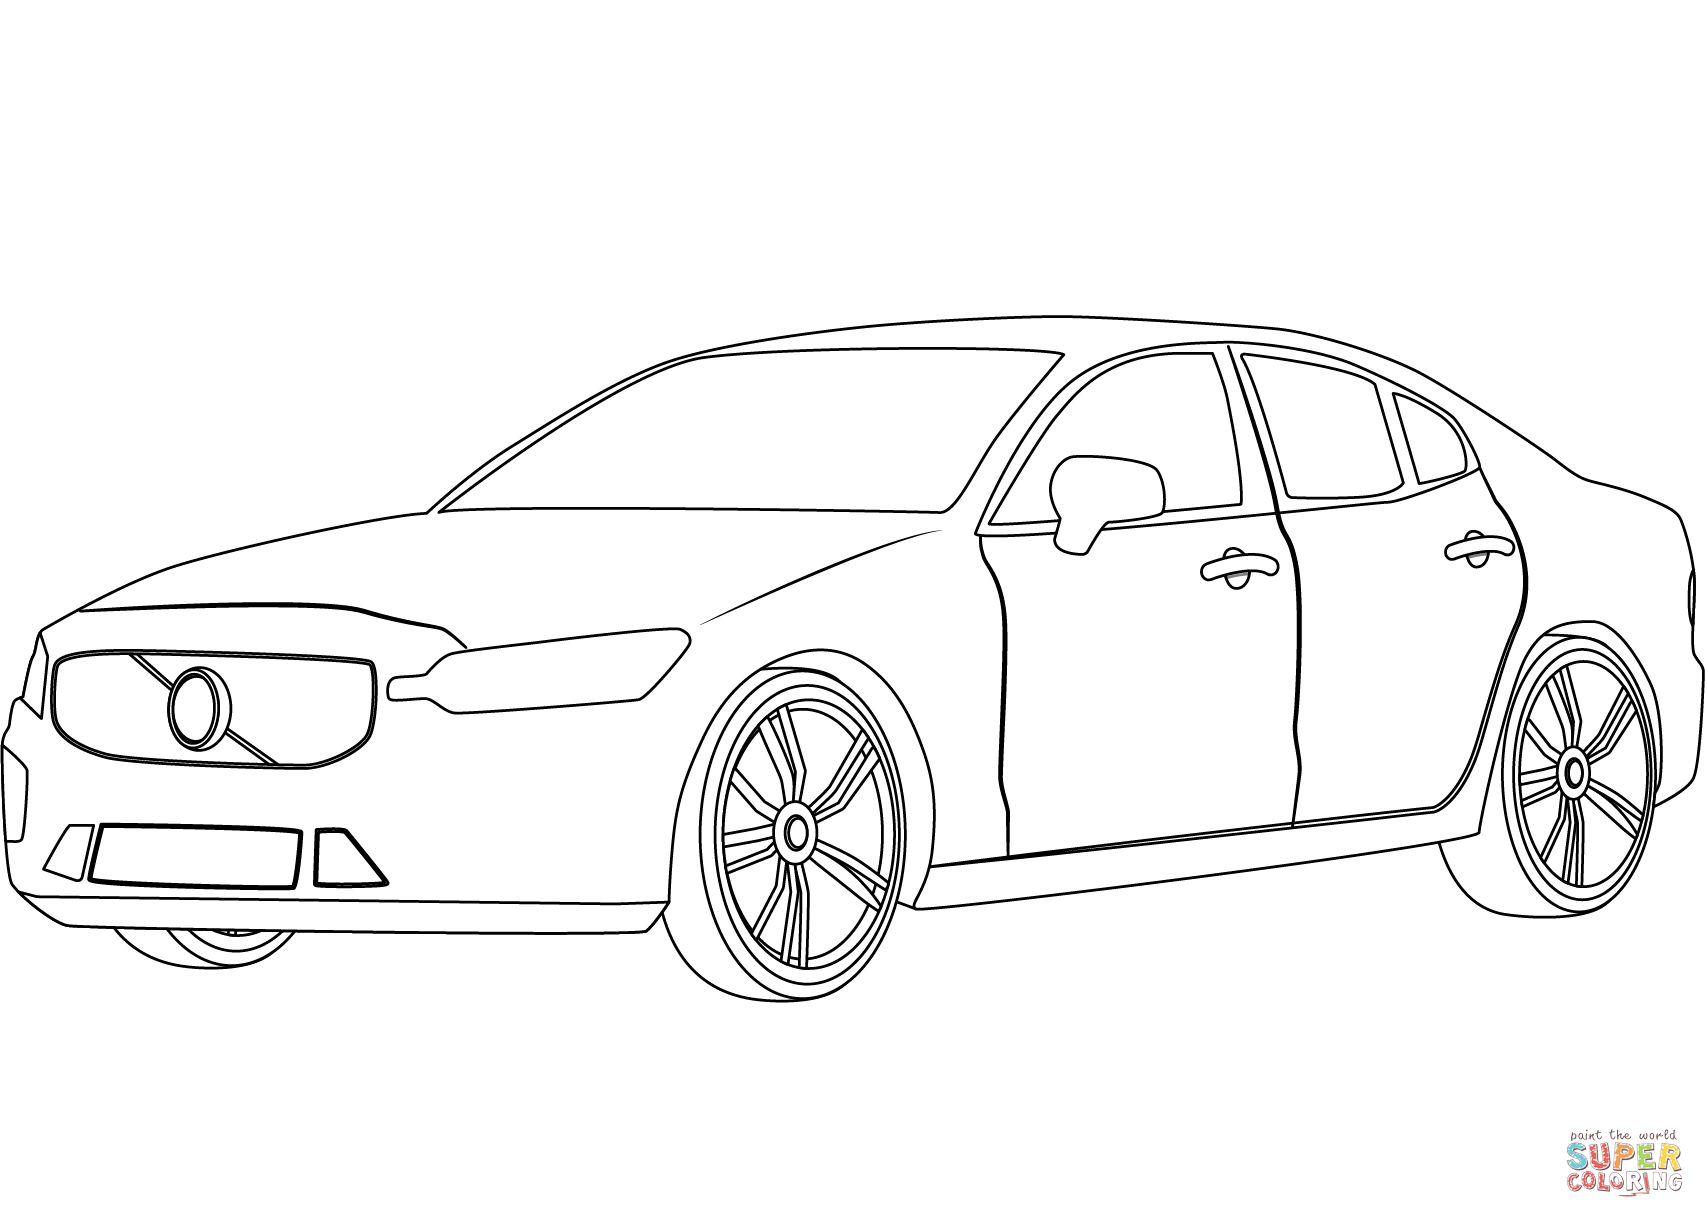 Volvo S60 coloring page | Free Printable Coloring Pages